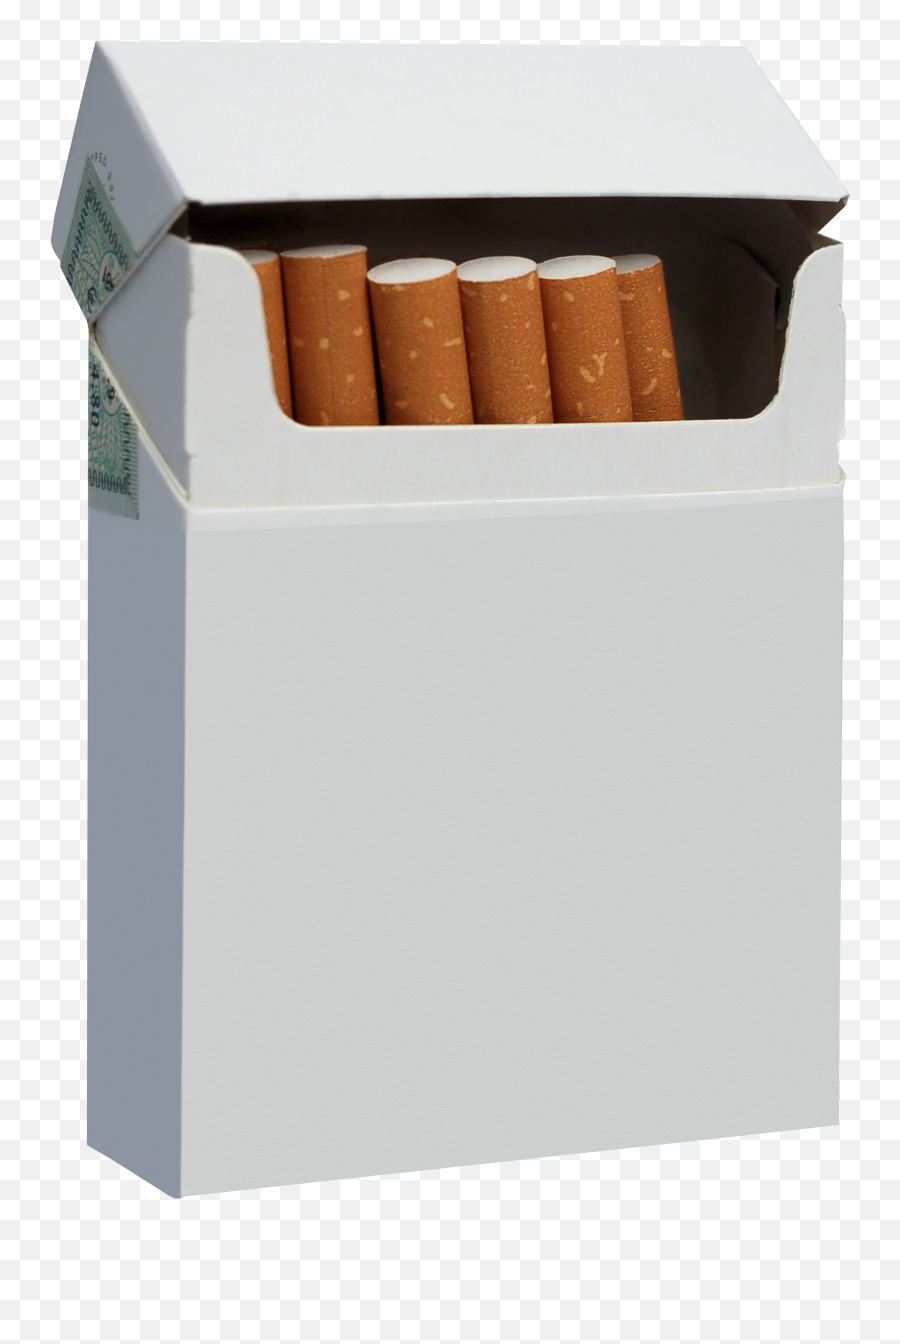 Cigarette Png Image For Free Download - Transparent Background Cigarette Pack Png,Cigarettes Png